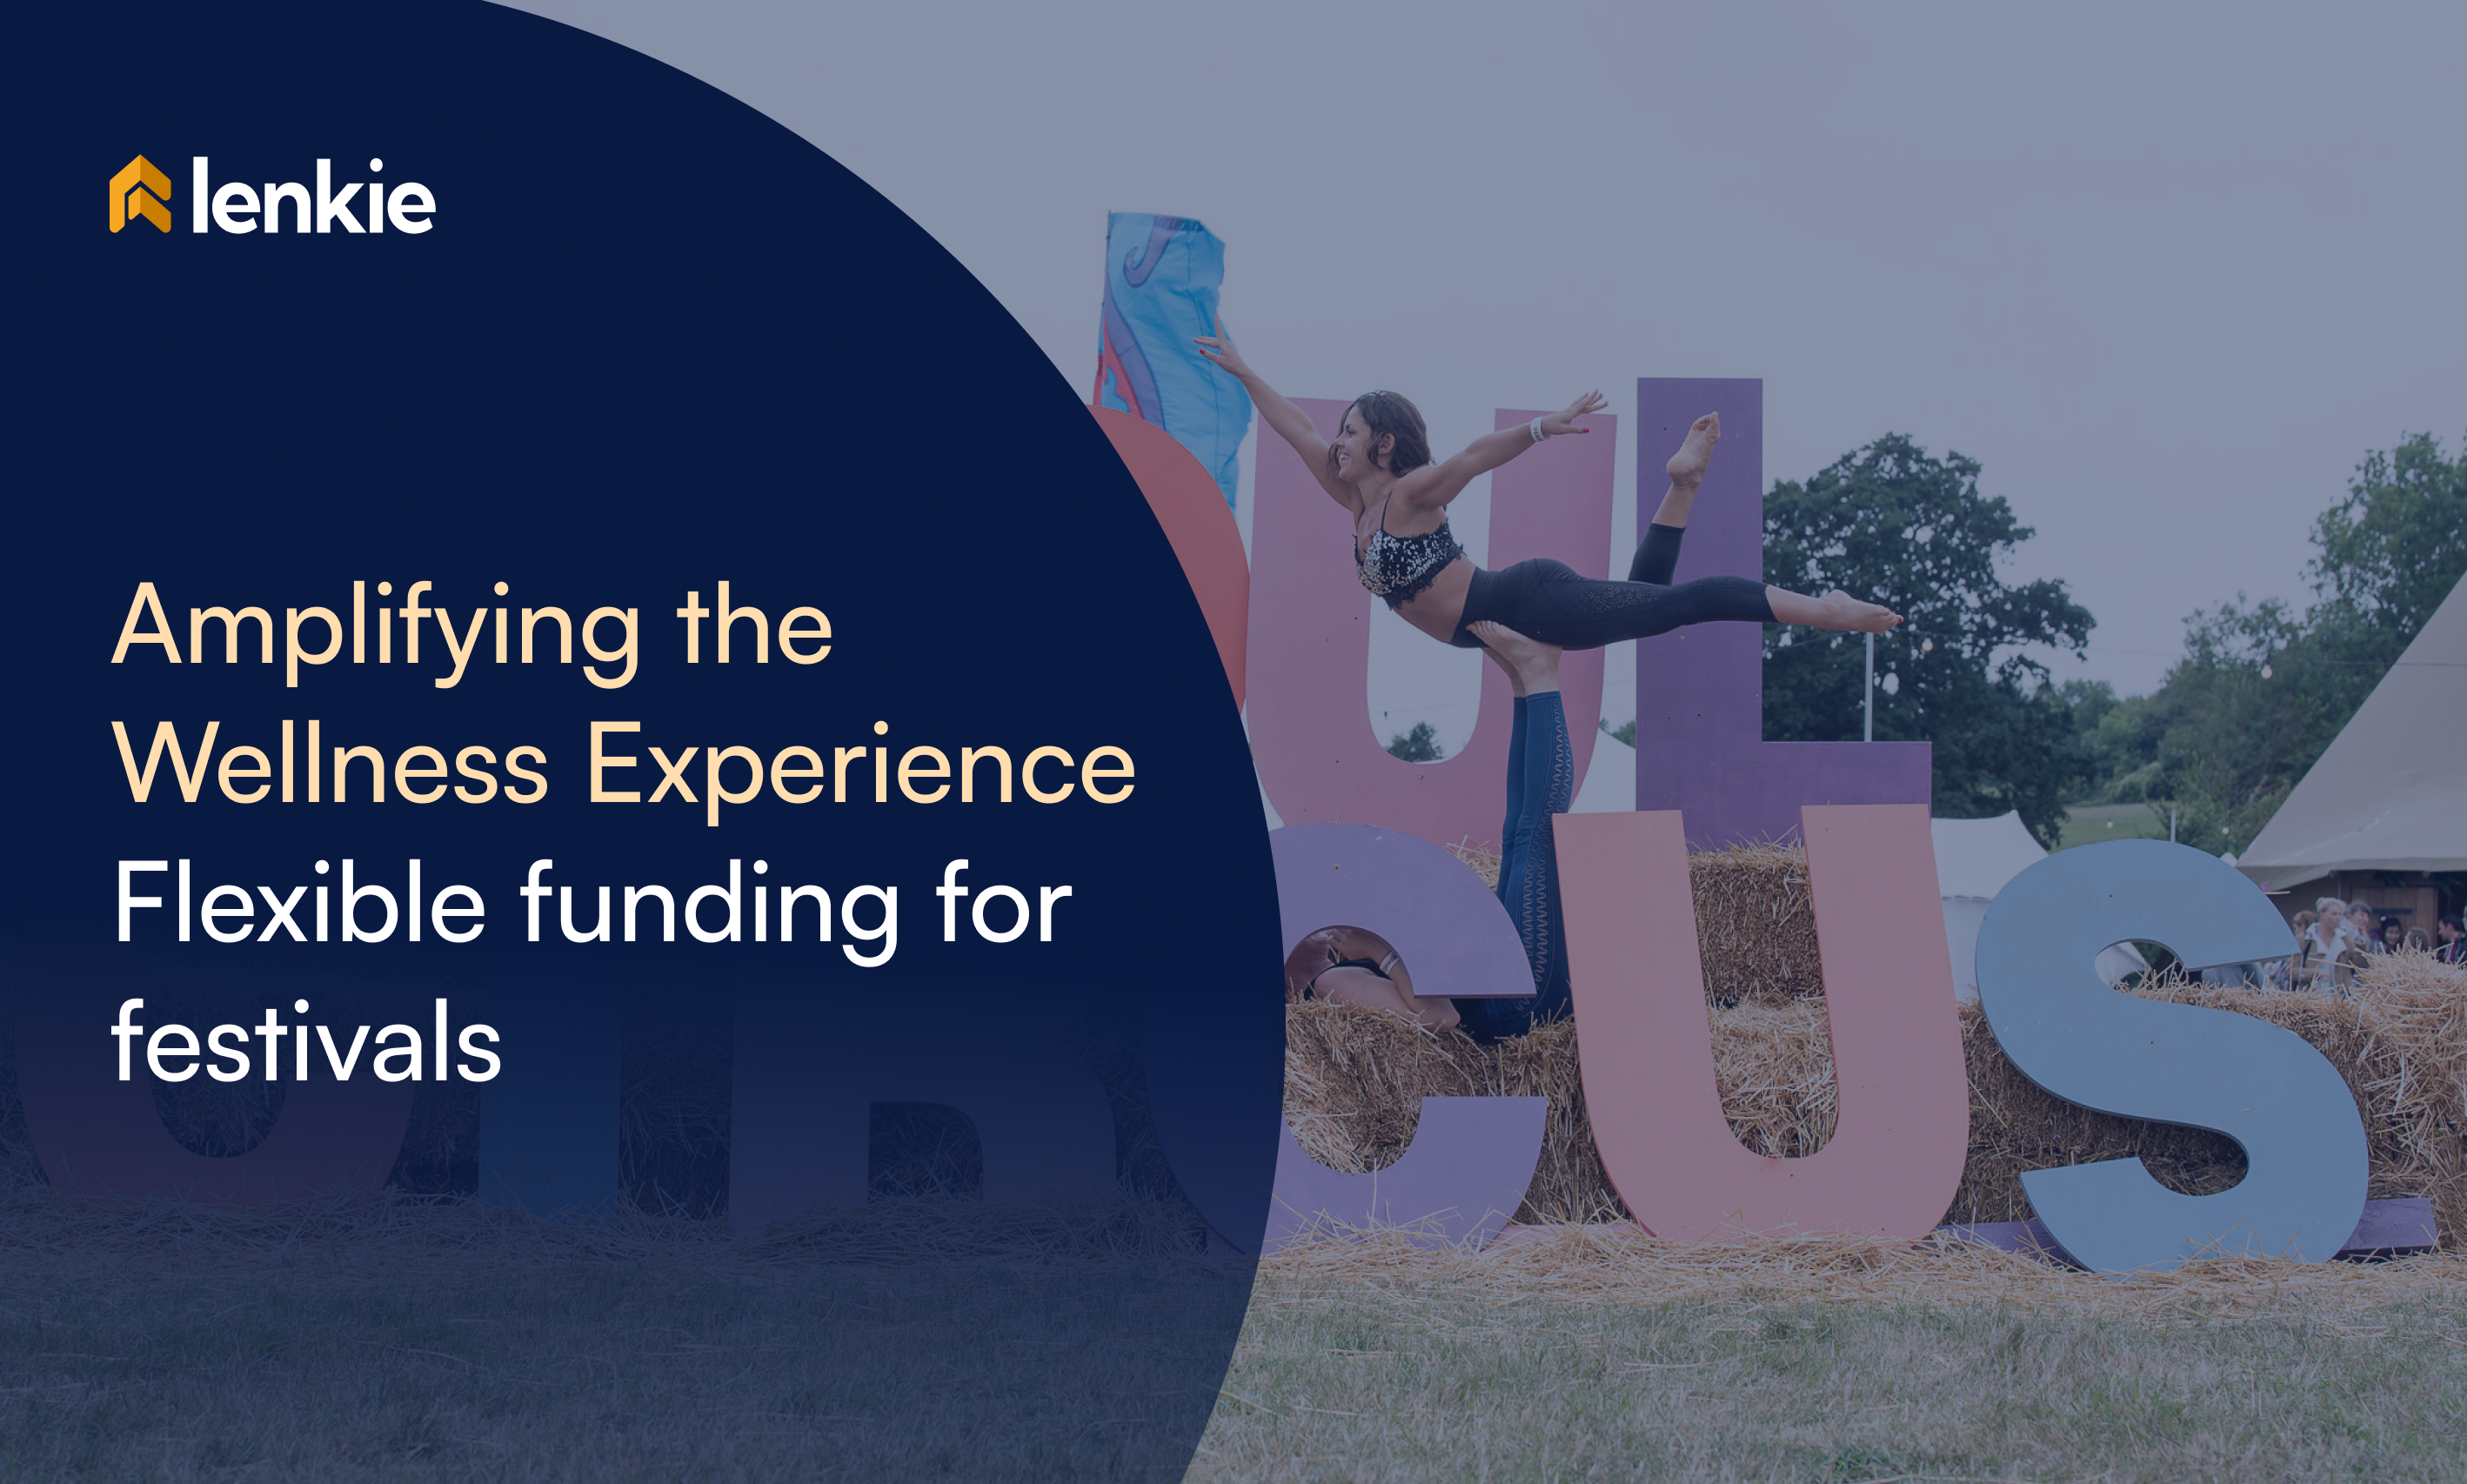 Amplifying the Wellness Experience - Flexible funding for festivals